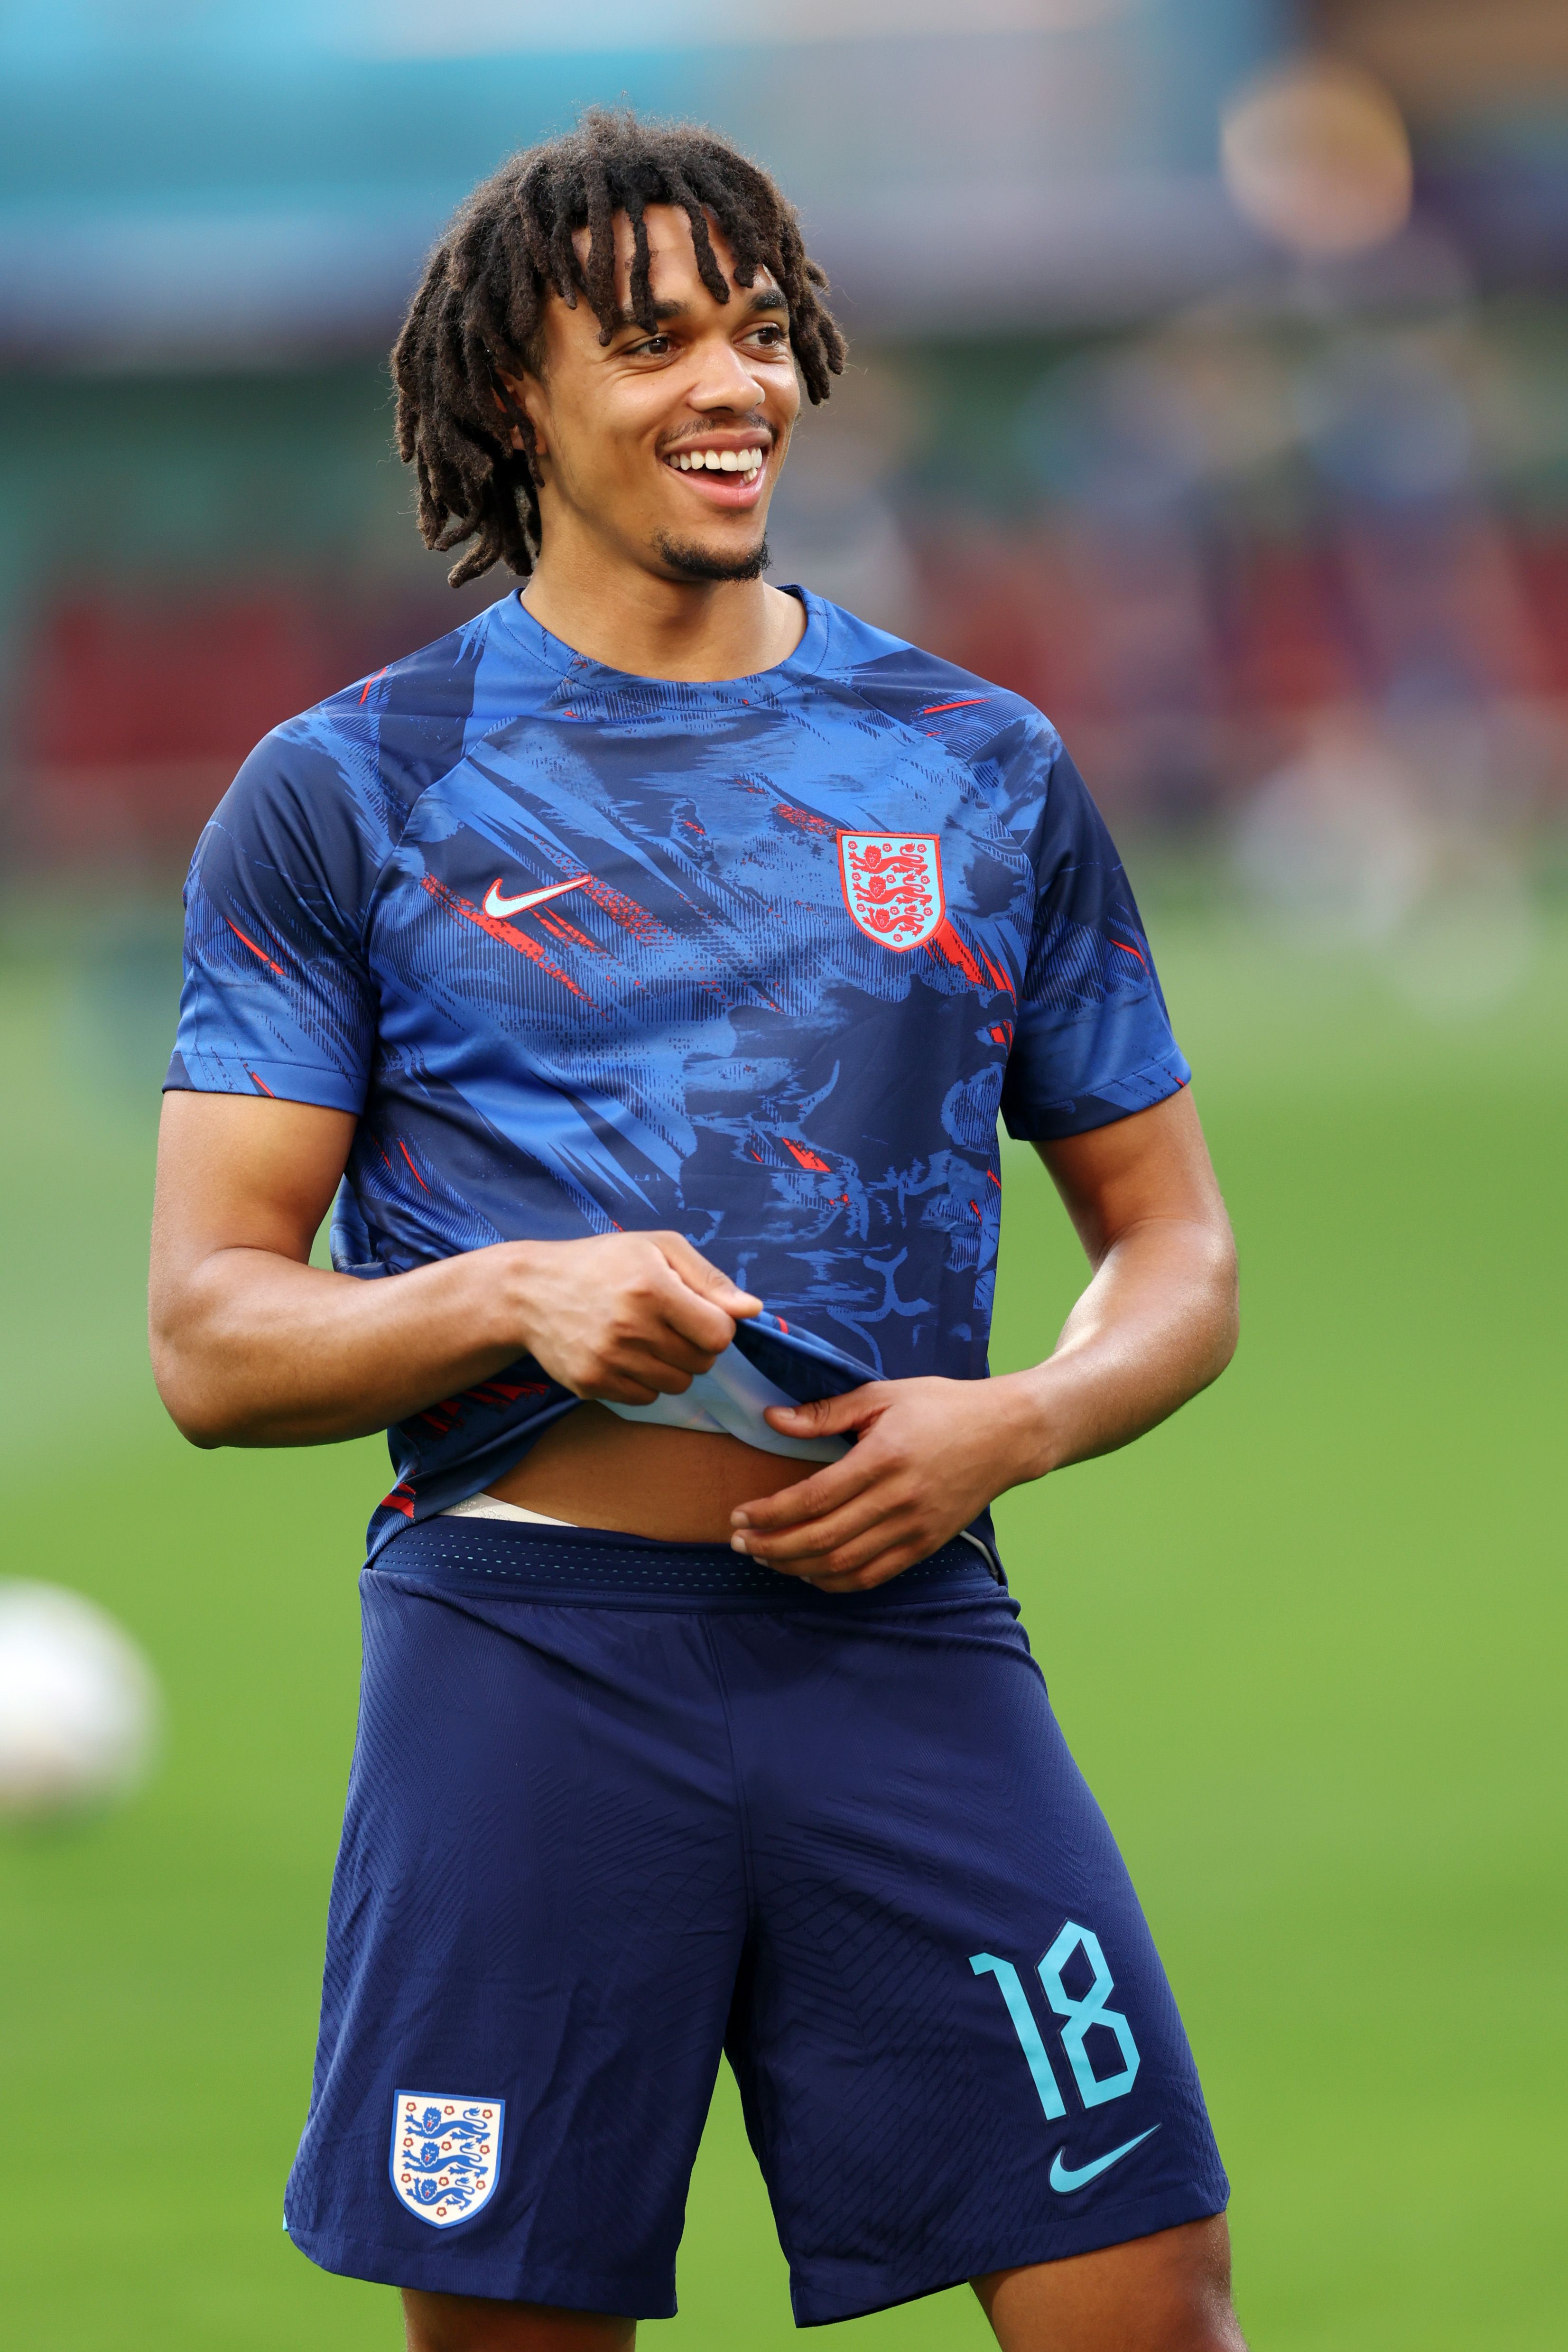 Alexander-Arnold laughs in England training.